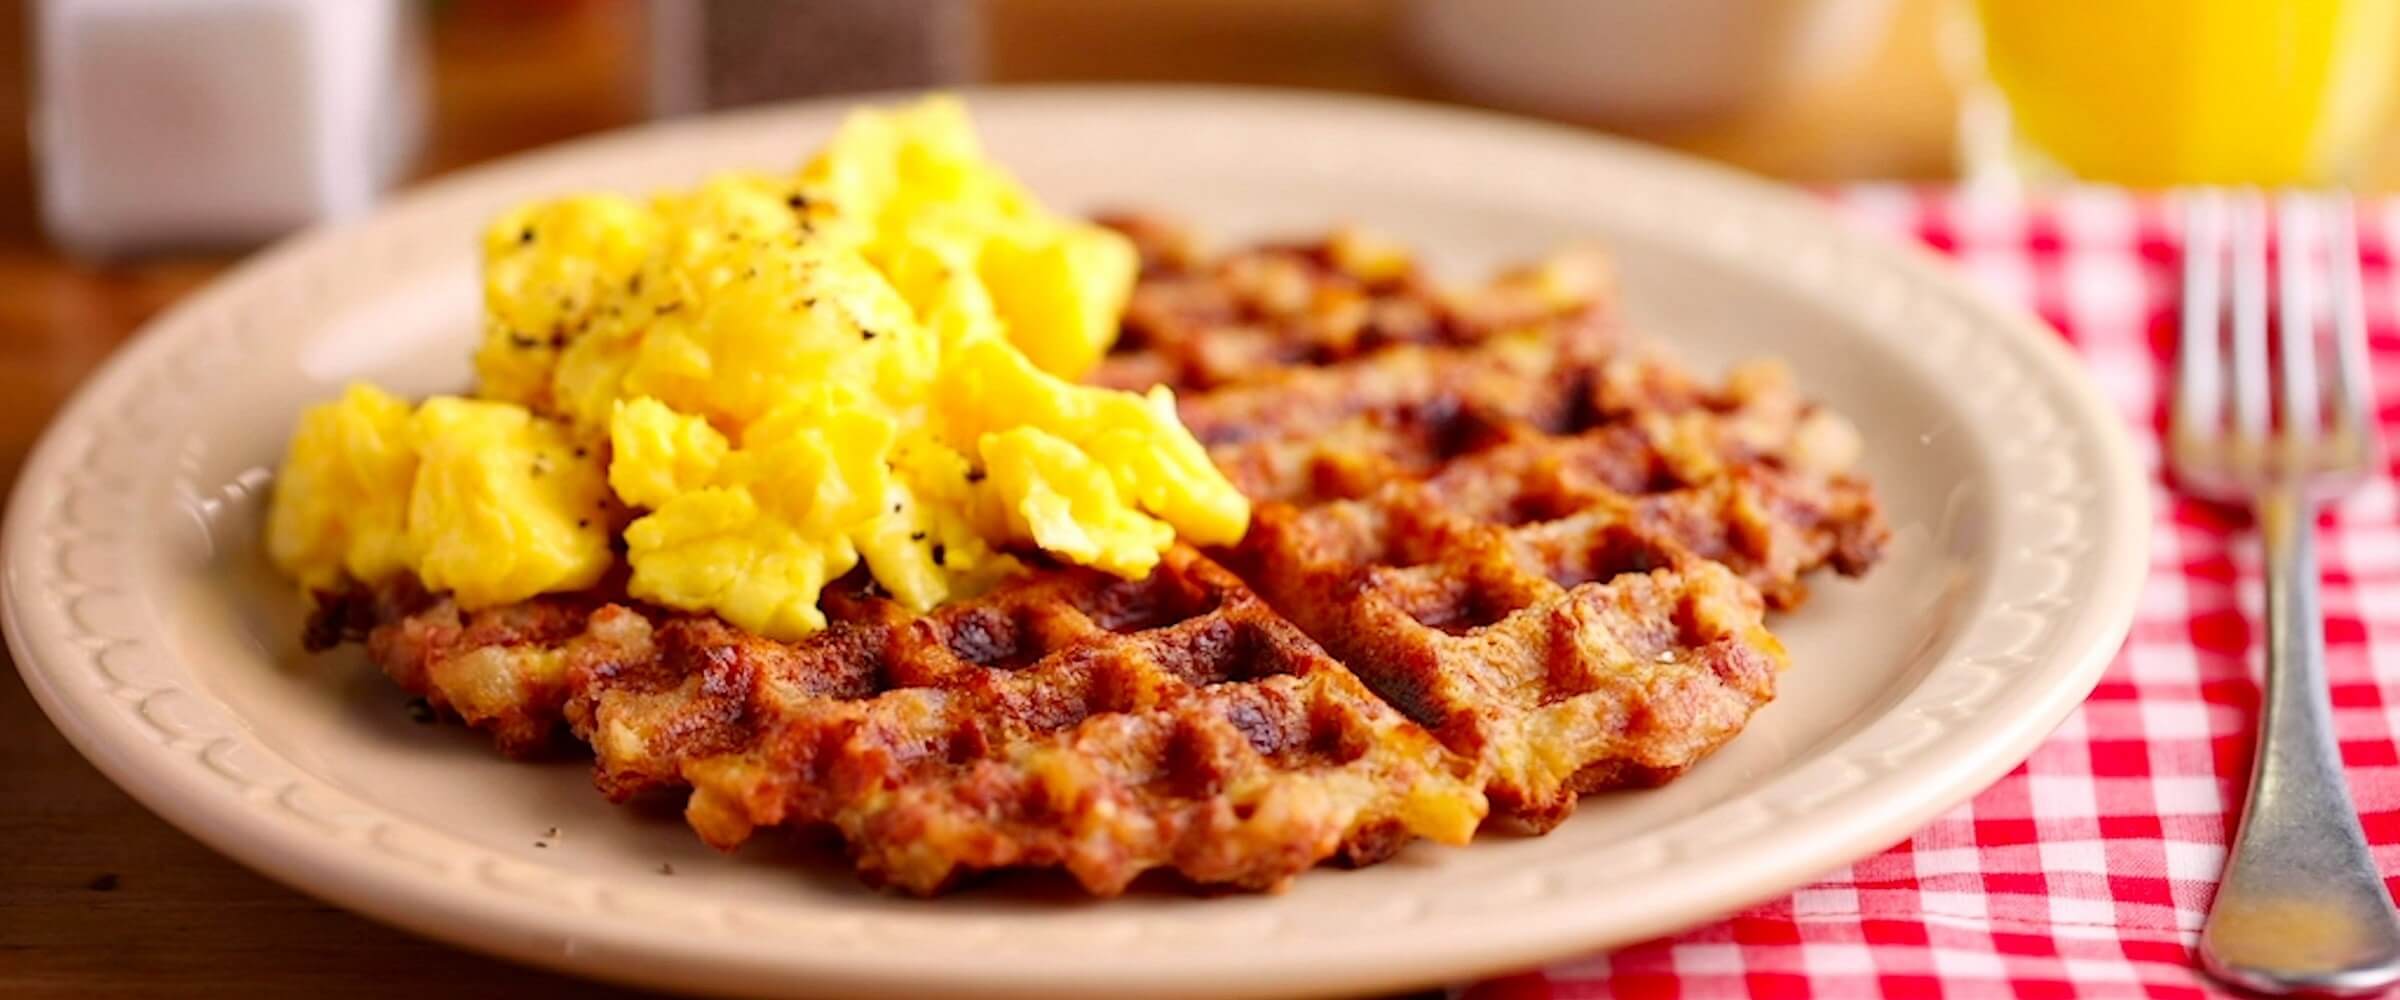 Corned beef hash homestyle waffle with eggs on plate with red and white checkered napkin